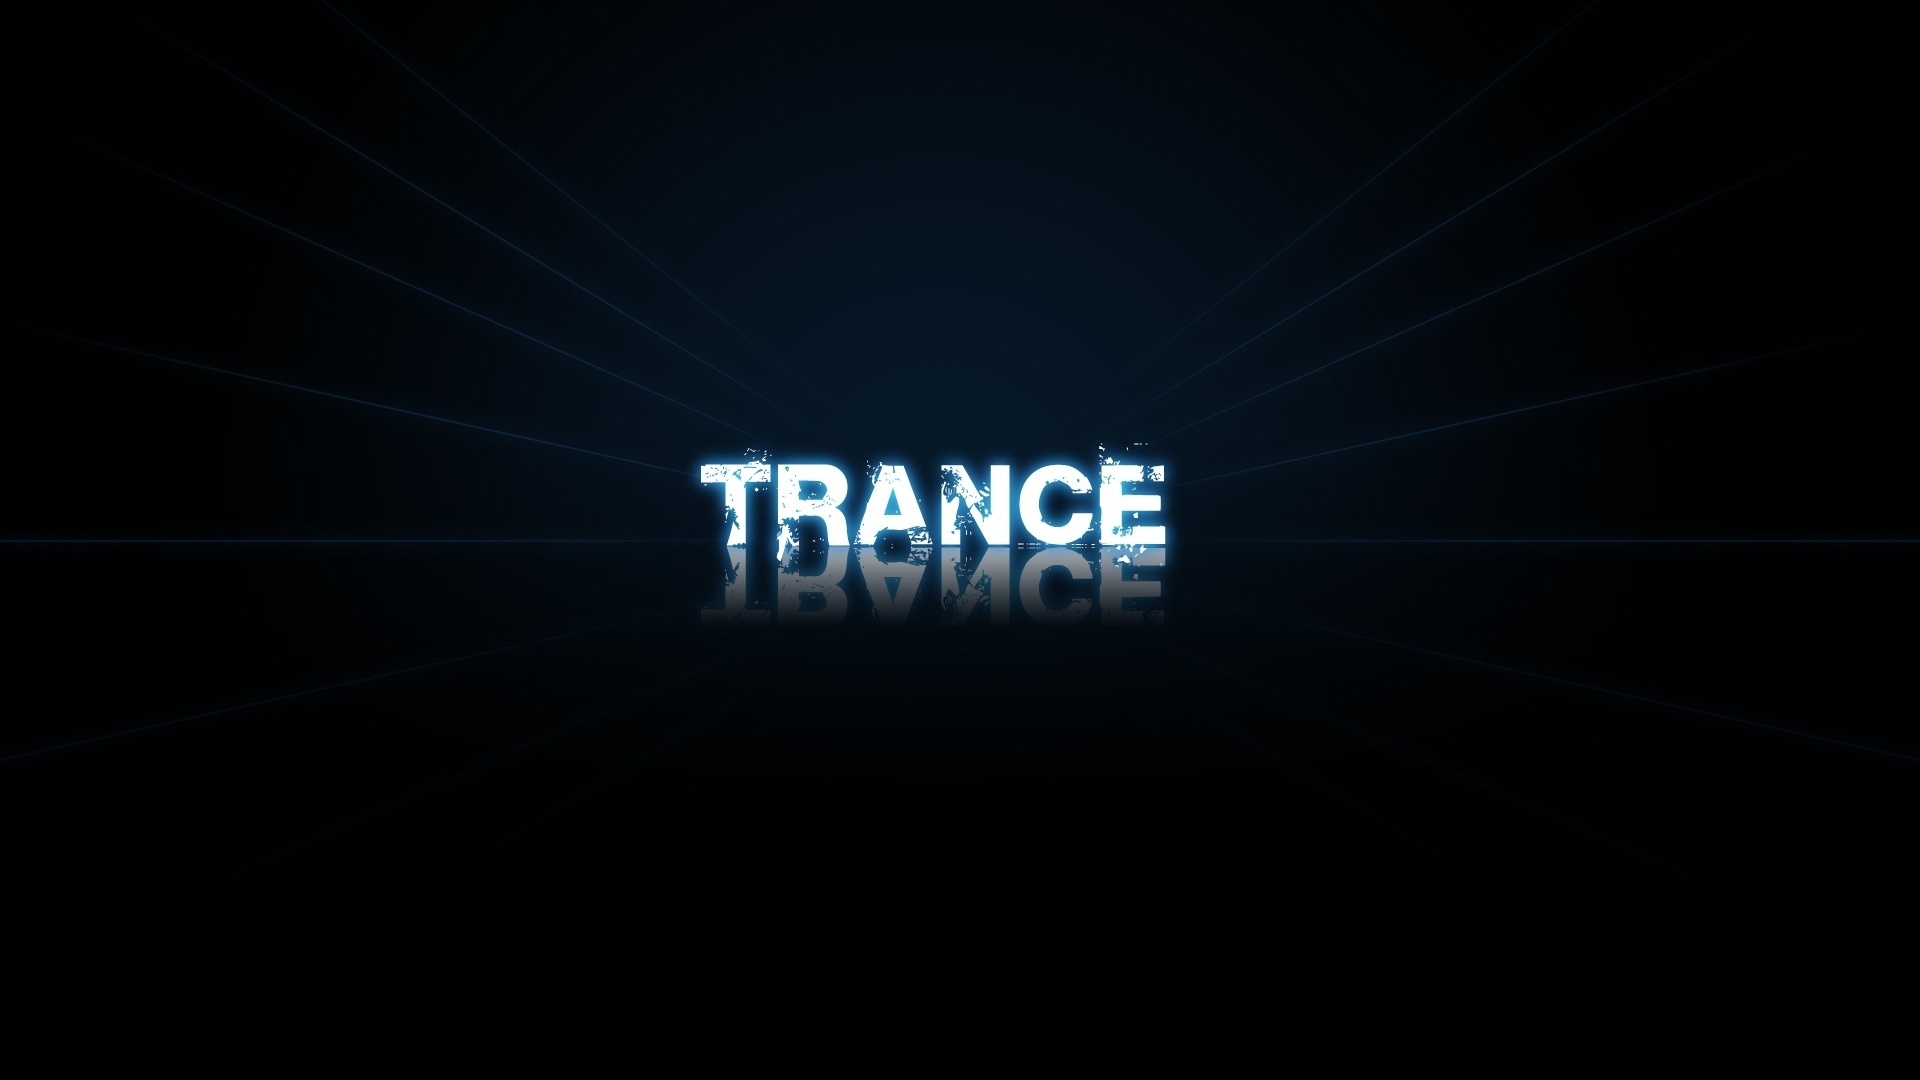 Gallery For Gt Trance Wallpaper HD